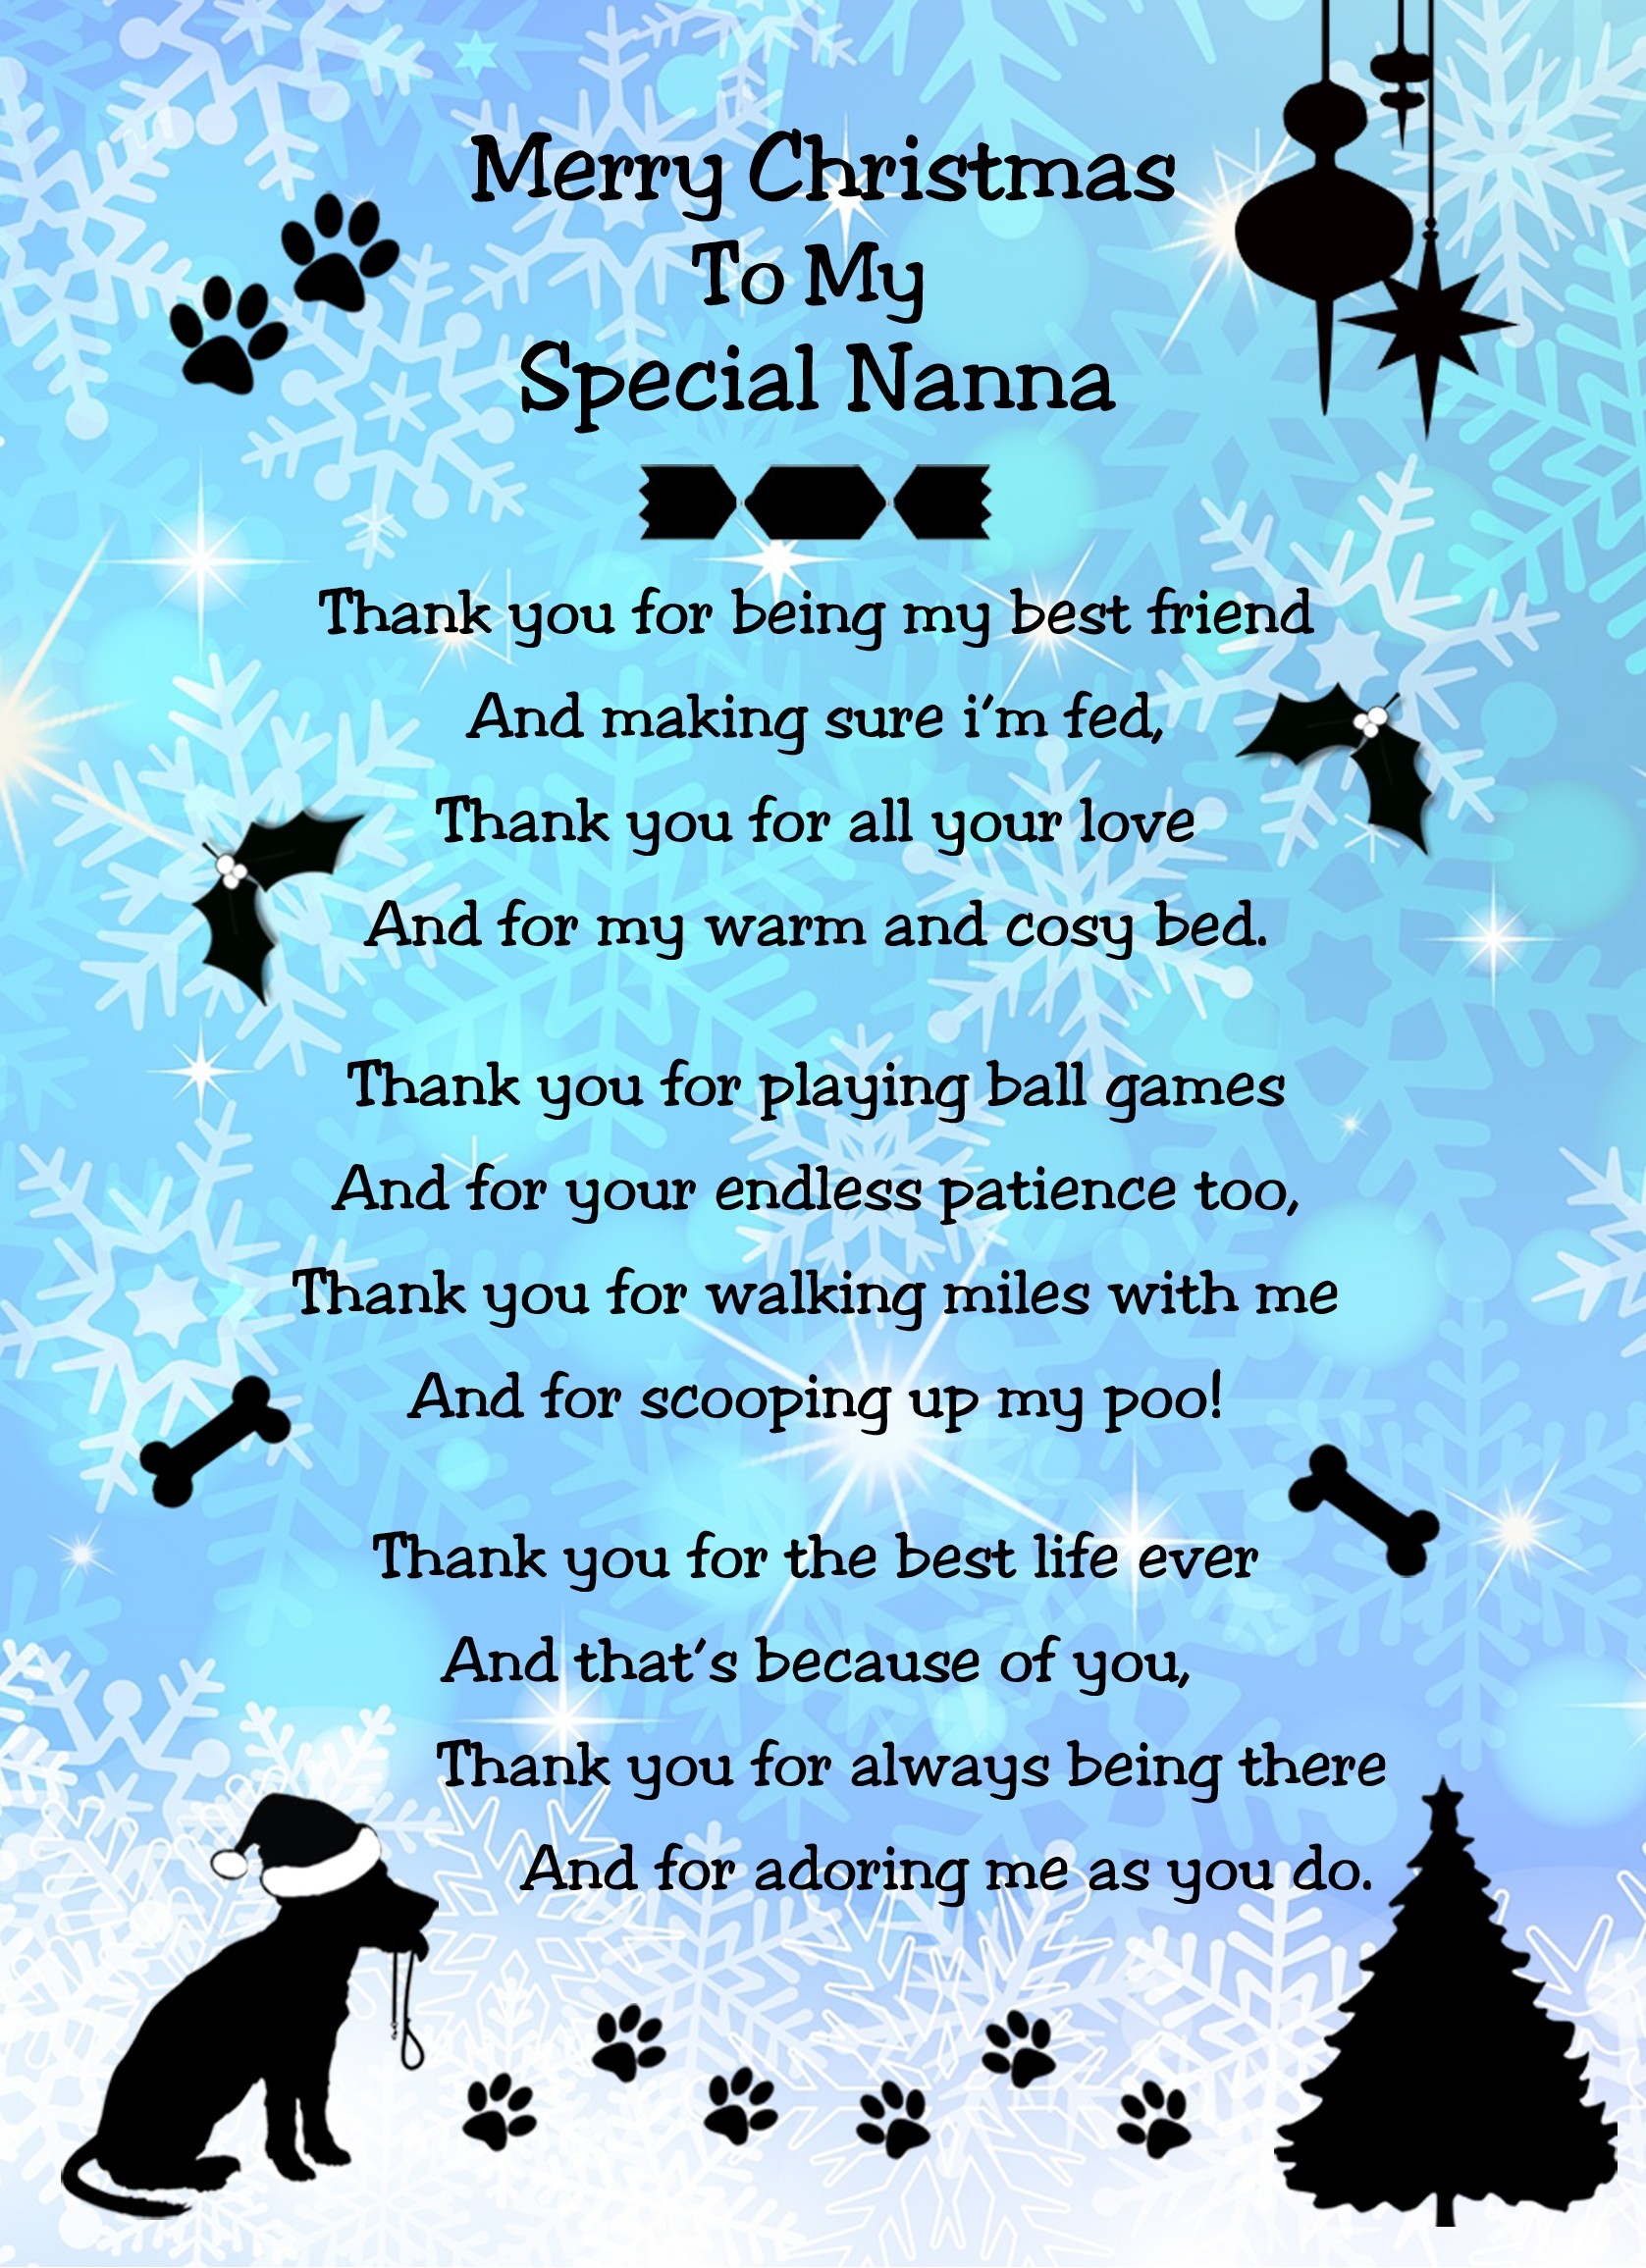 From The Dog Verse Poem Christmas Card (Special Nanna, Snowflake, Merry Christmas)